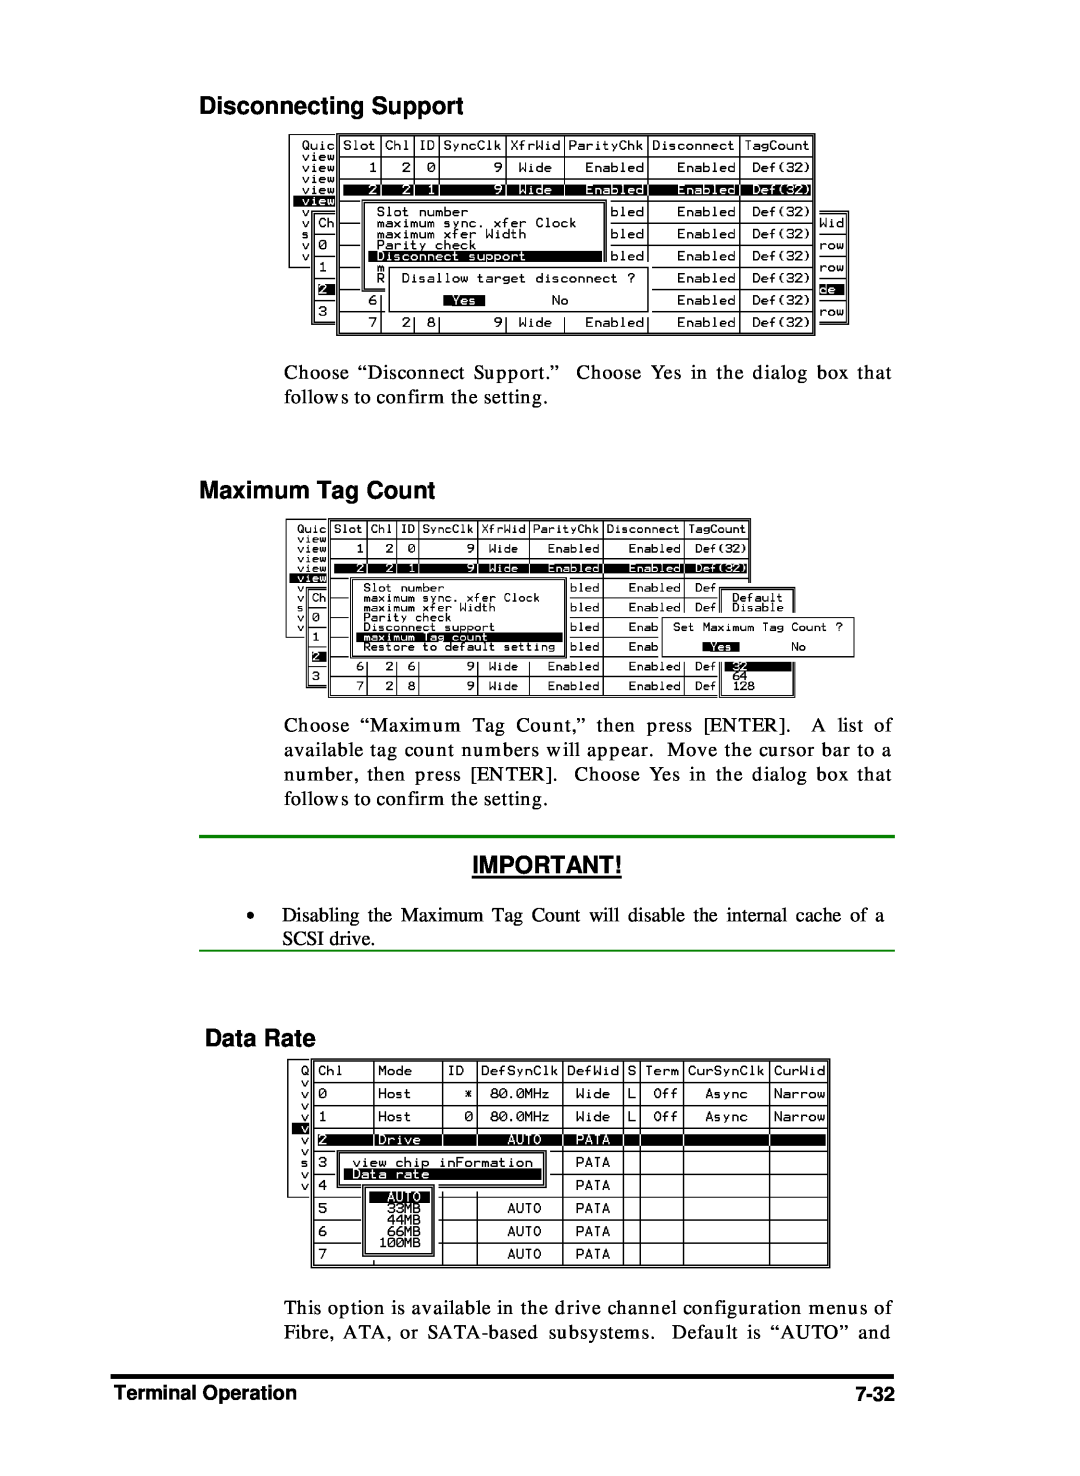 Compaq Infortrend manual Data Rate, Disconnecting Support, Maximum Tag Count 